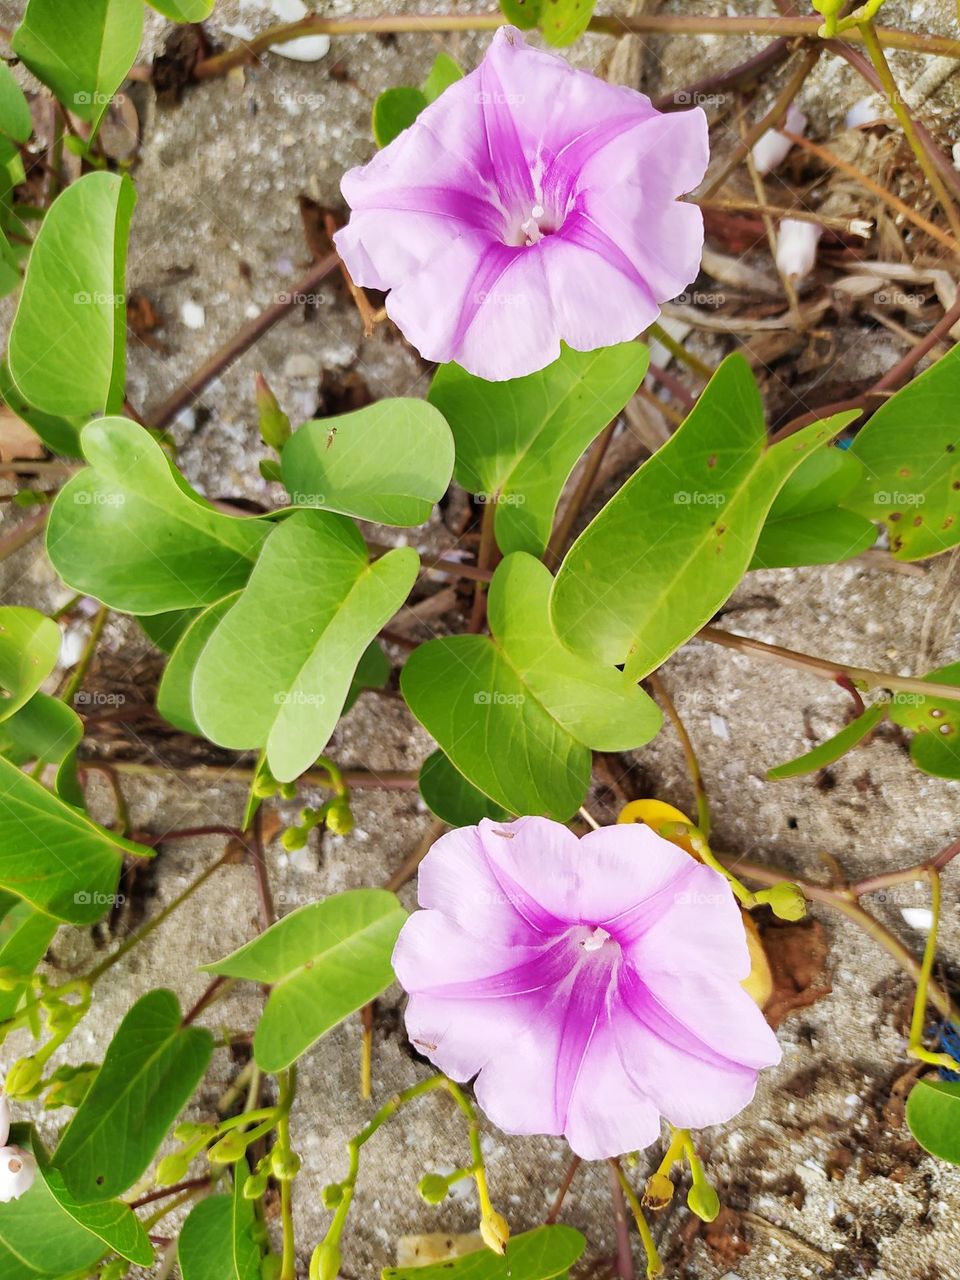 Ipomoea pes-caprae, in Indonesia called the katang katang or tread horse plant, grows on sandy beaches, the flowers are beautiful purple